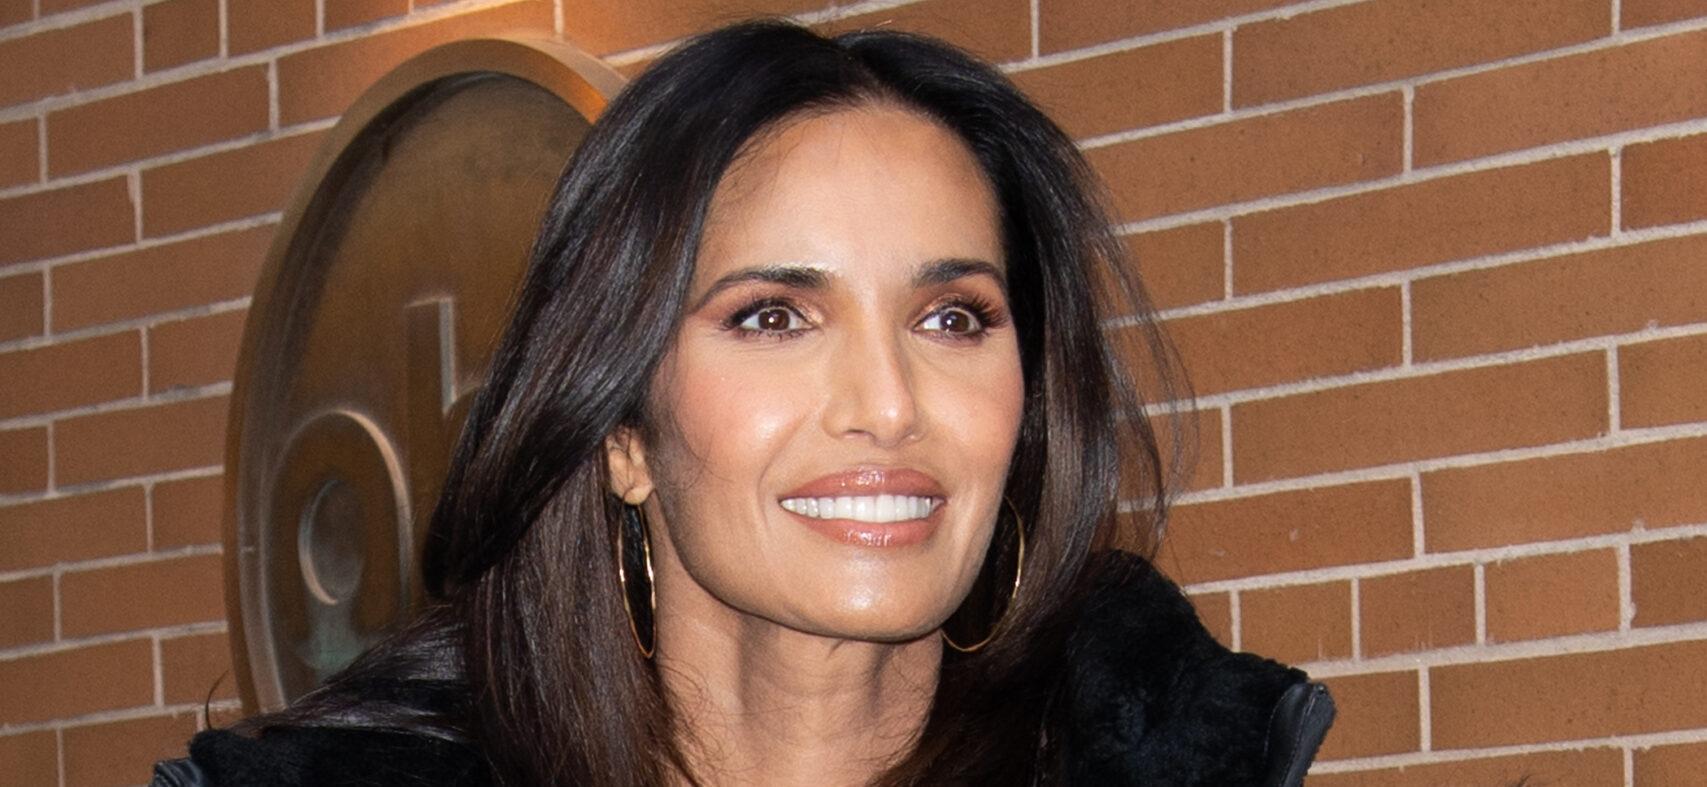 Padma Lakshmi Says It’s ‘Time To Move On’ From ‘Top Chef’ As She Announces Exit After 17 Years